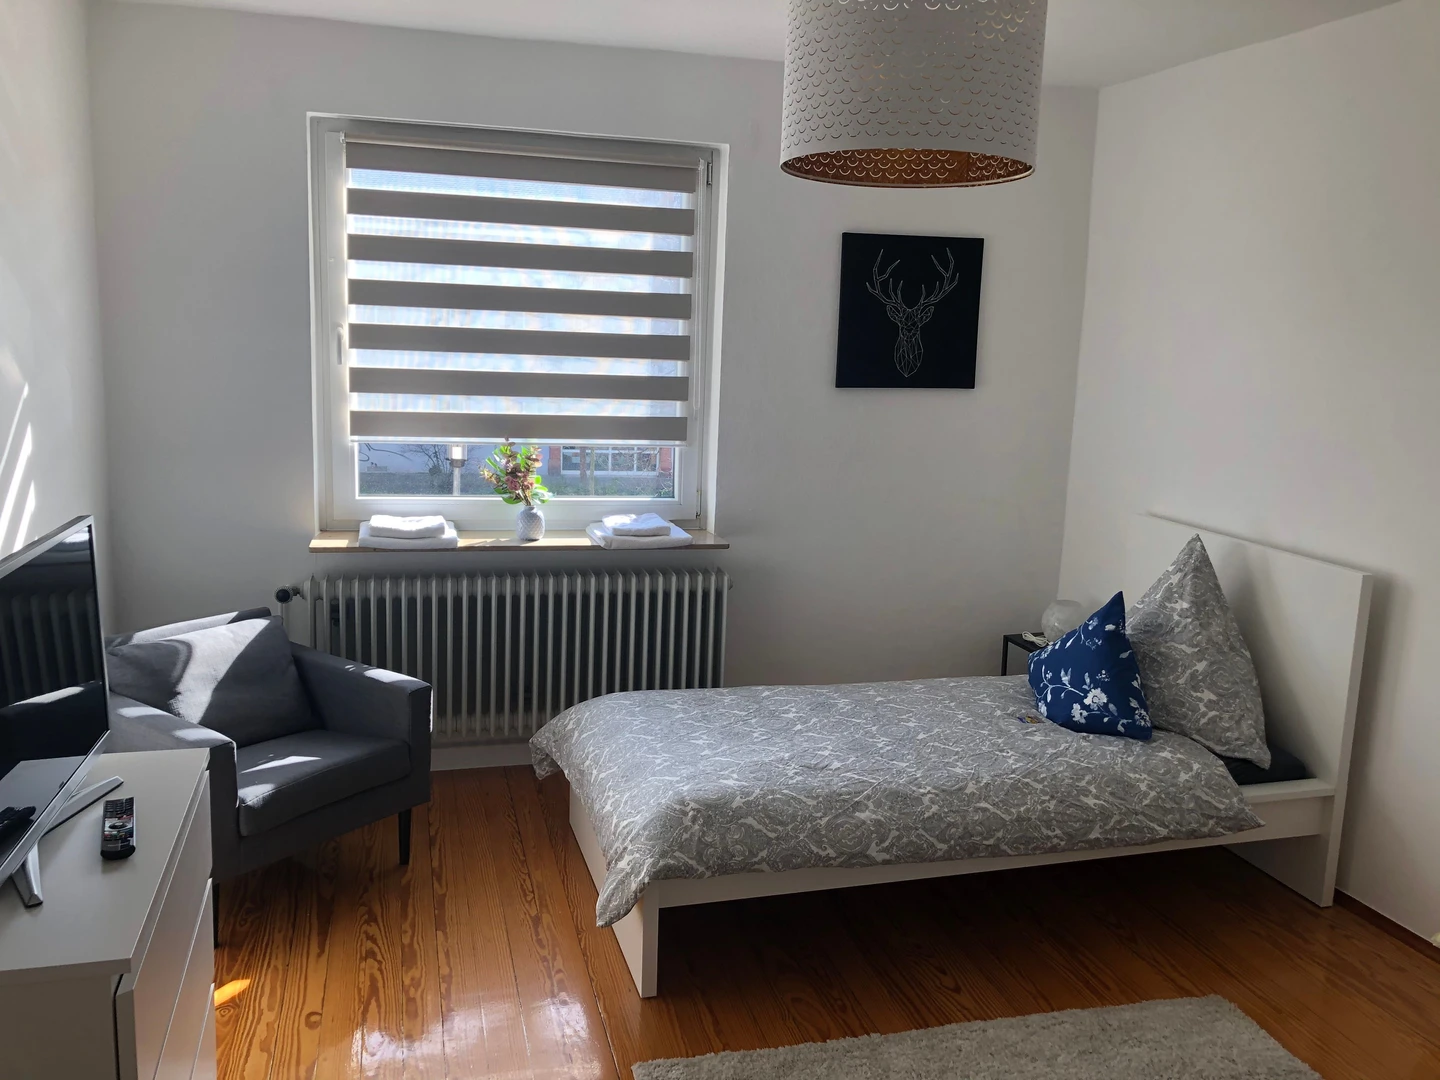 Room for rent in a shared flat in Kaiserslautern